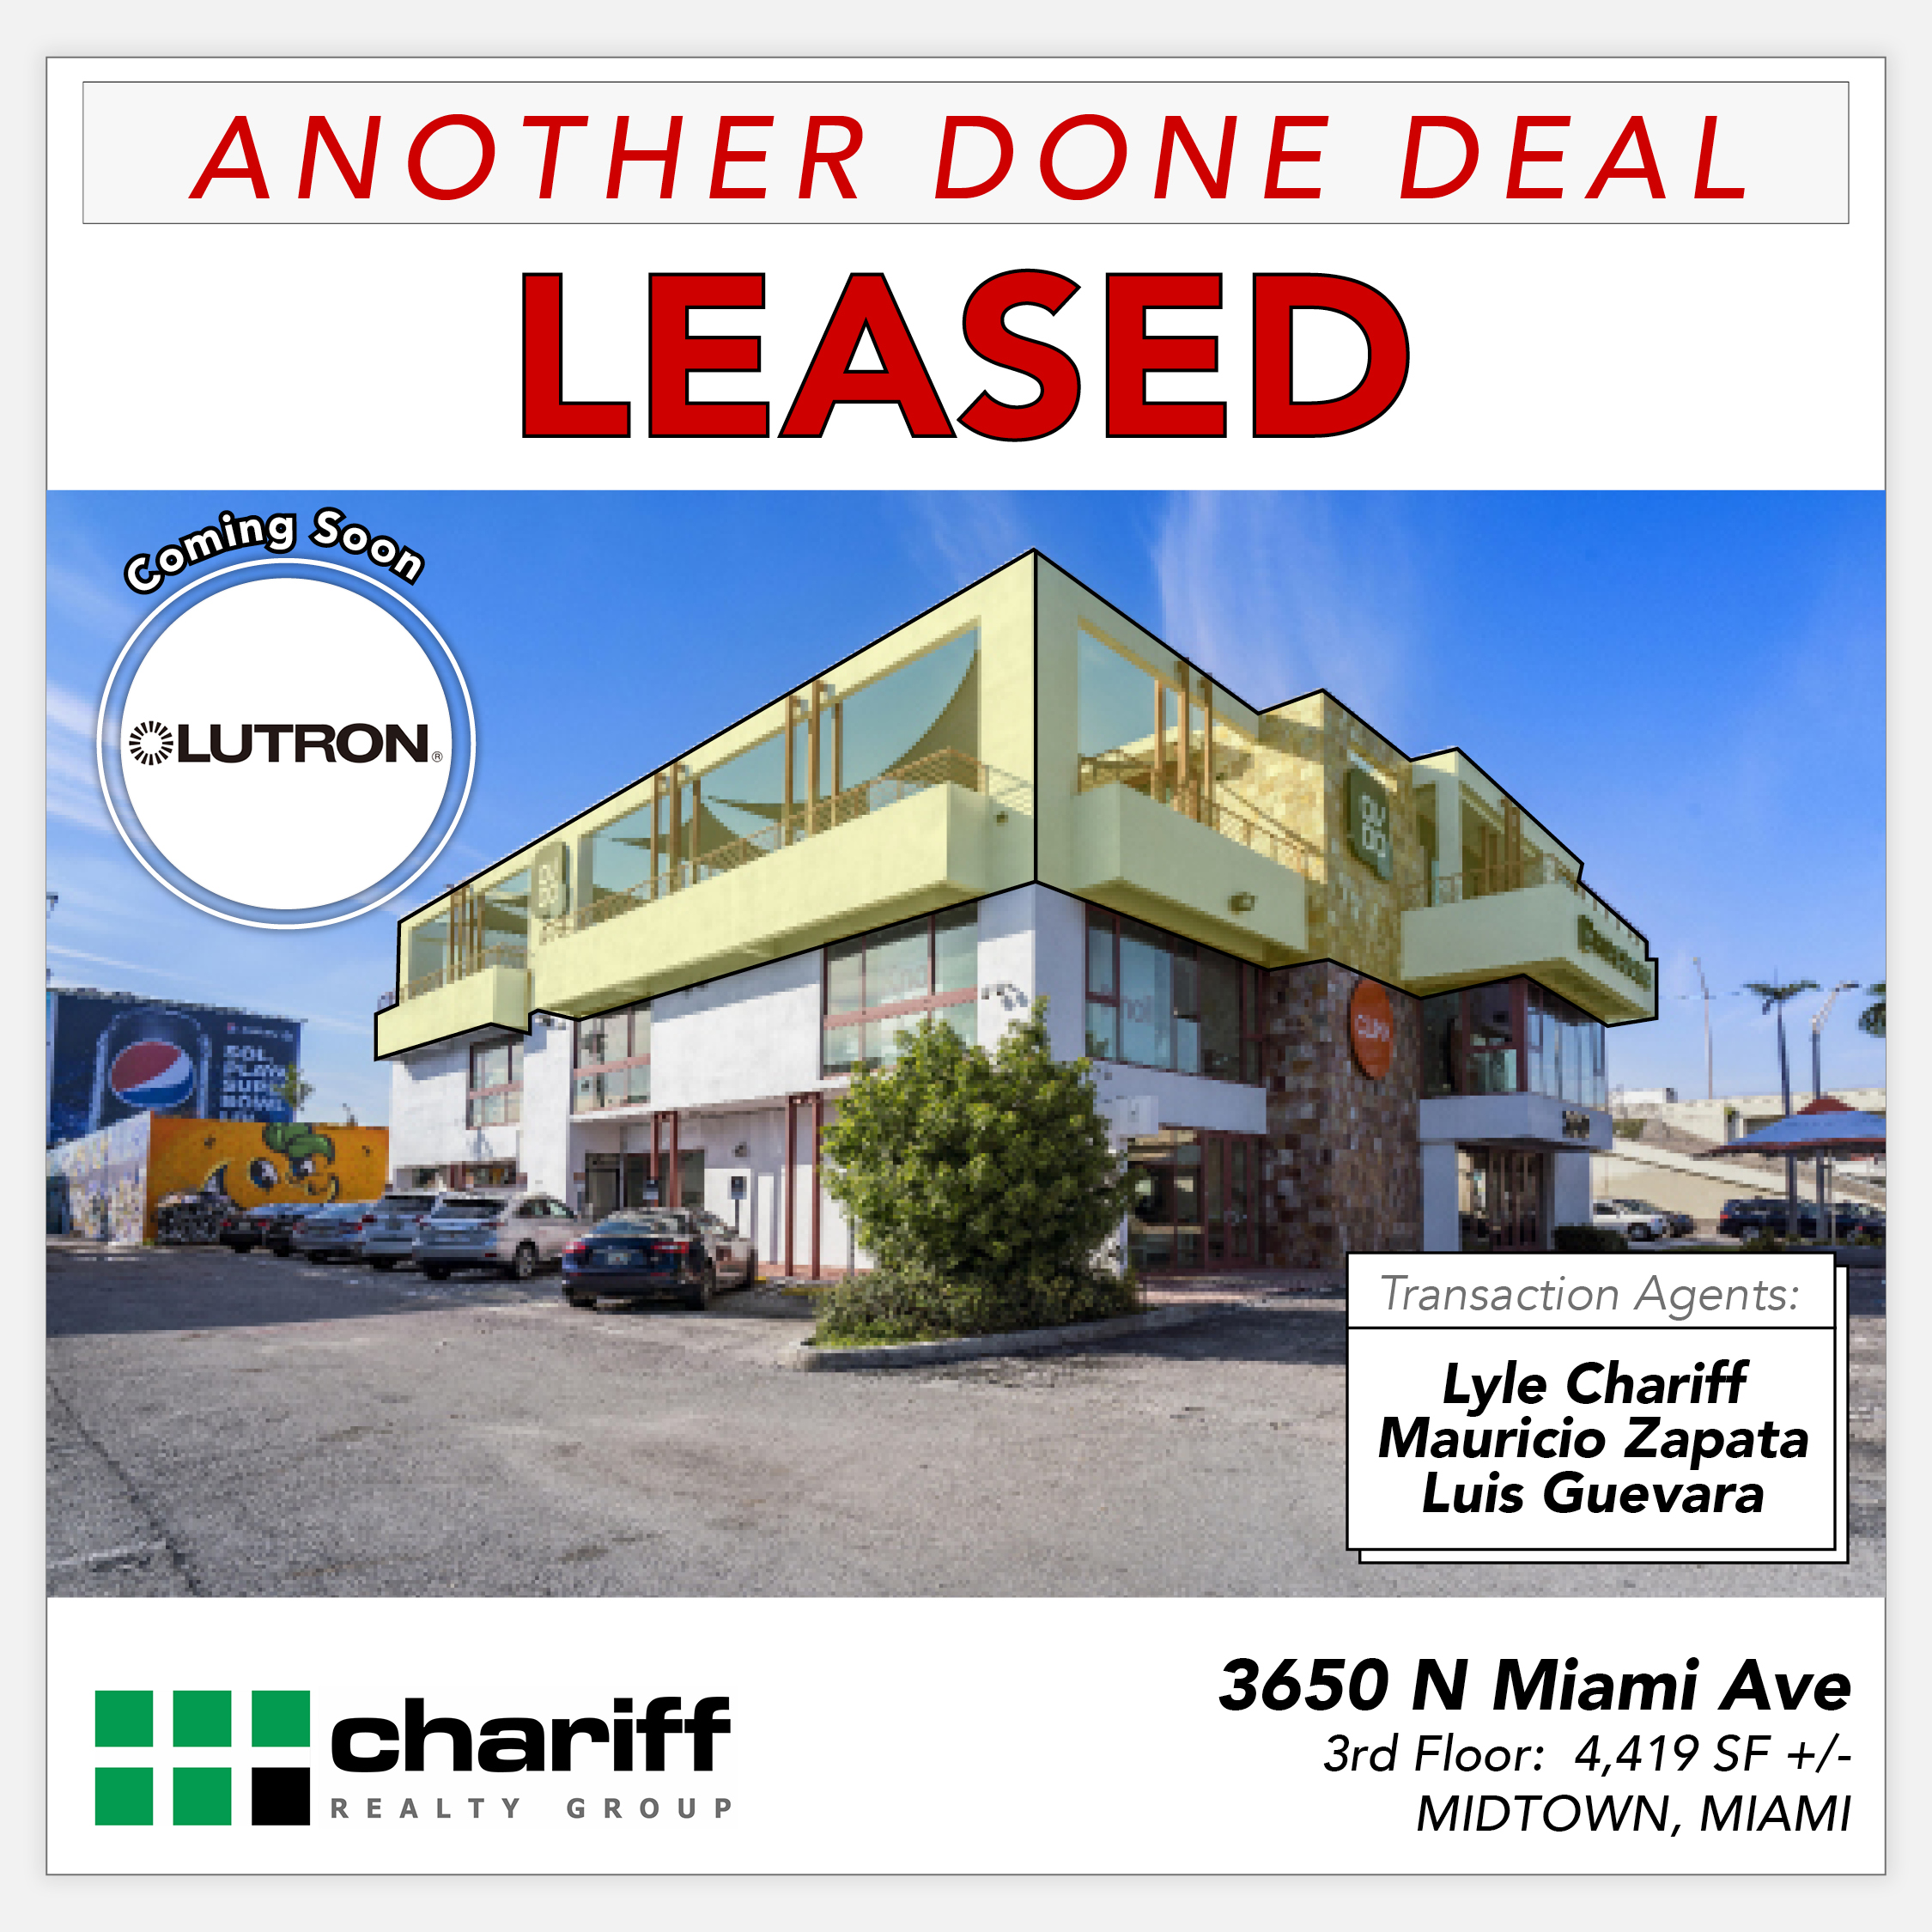 3650 N Miami Ave - Another Done Deal - Leased -Miami Design District Miami-Florida-33137-Chariff Realty Group